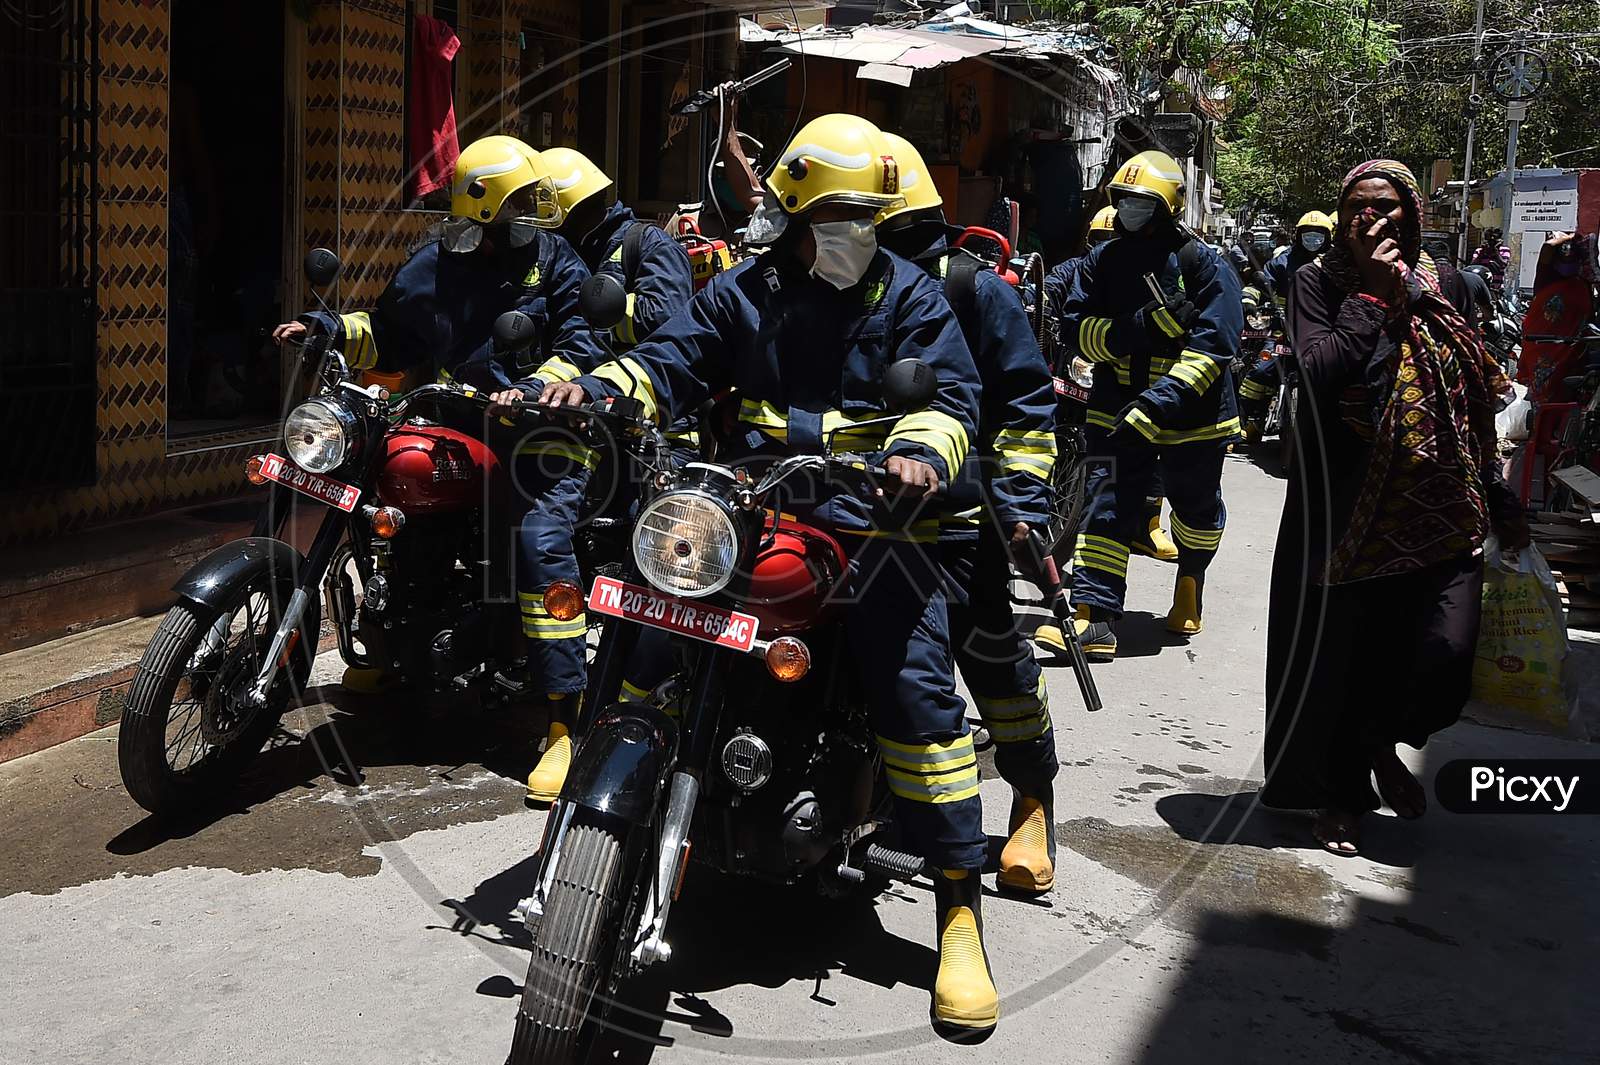 Firefighters equipped with disinfectants assemble in a containment zone during the lockdown in Chennai on July 04, 2020.